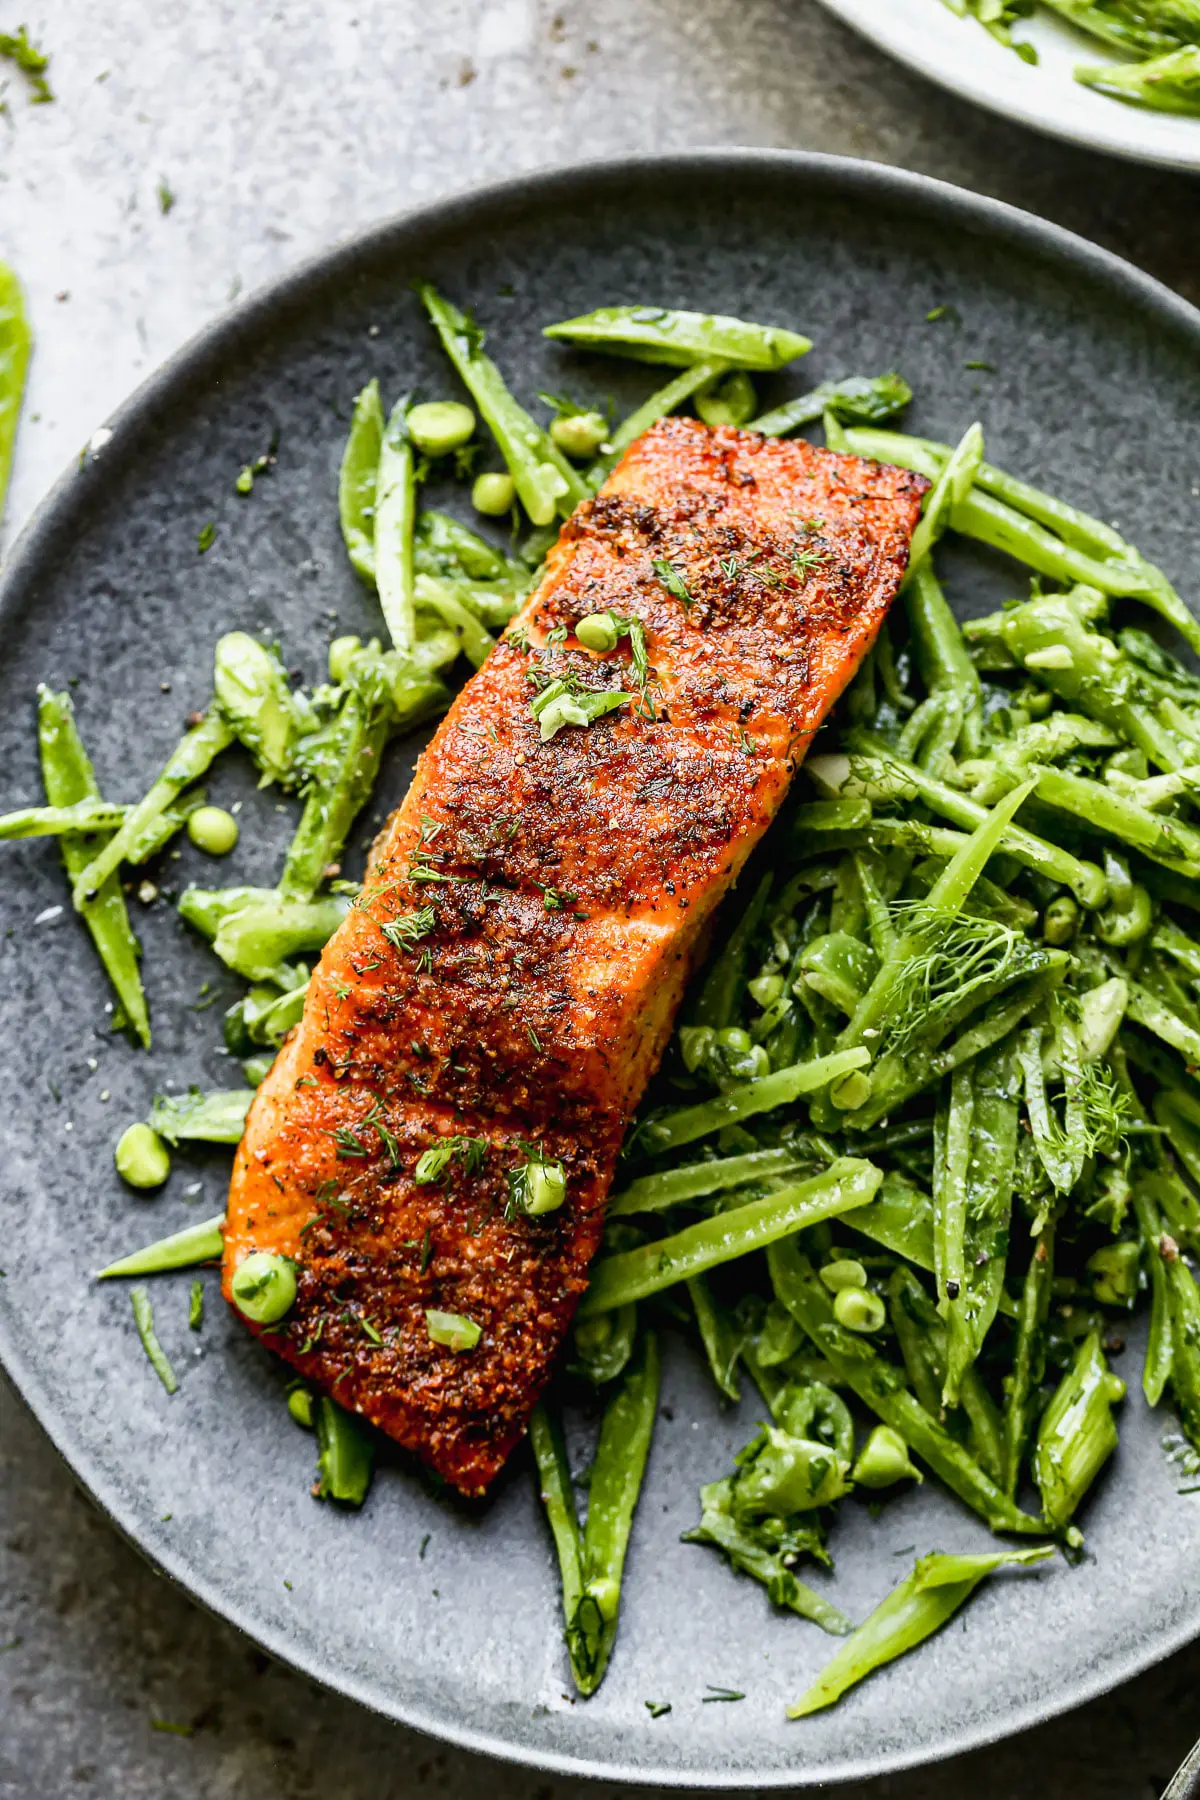 Want salmon that's ultra crispy on the outside, moist on the inside, and abundant with flavor? Head straight the grocery store and pick up the ingredients for our Blackened Air Fryer Salmon with Snap Pea Salad. This bright, spring-forward meal comes together in less than 30 minutes and will certainly find a home in your weekly dinner rotation. 